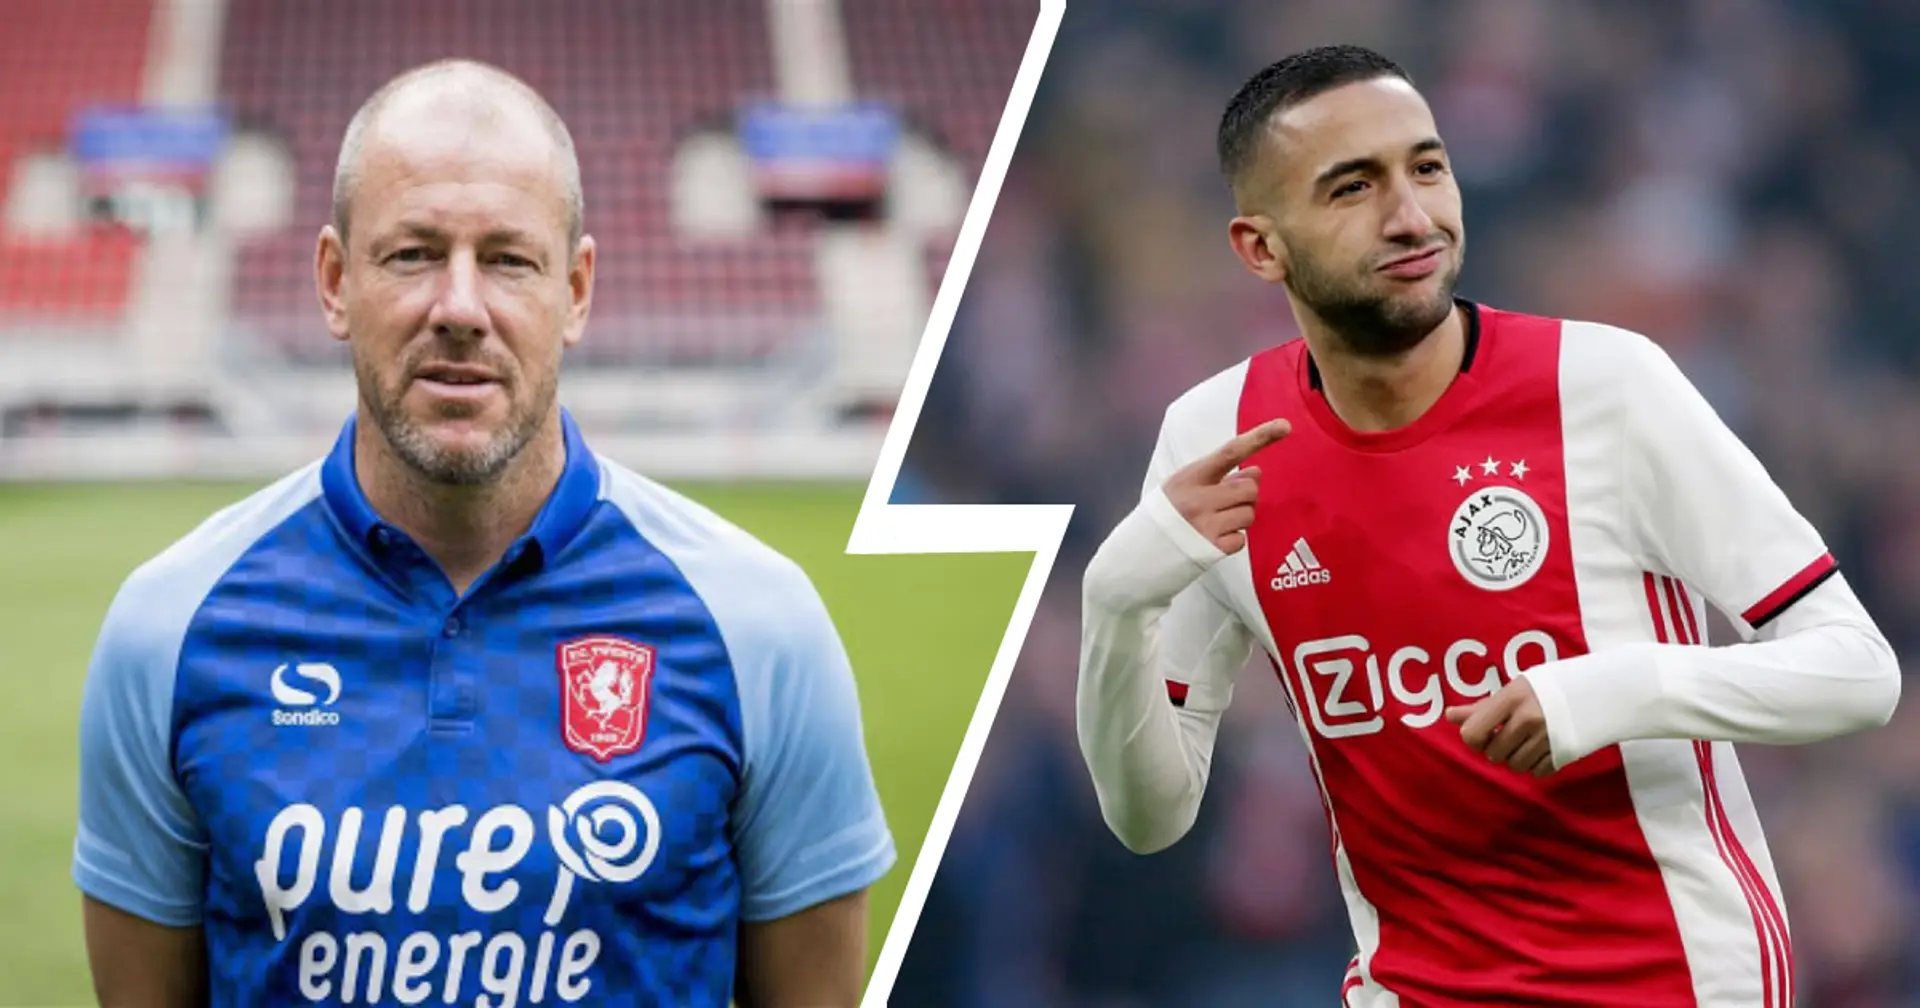 'The step to the Premier League will do him good': Hakim Ziyech's former coach backs him to succeed at Chelsea